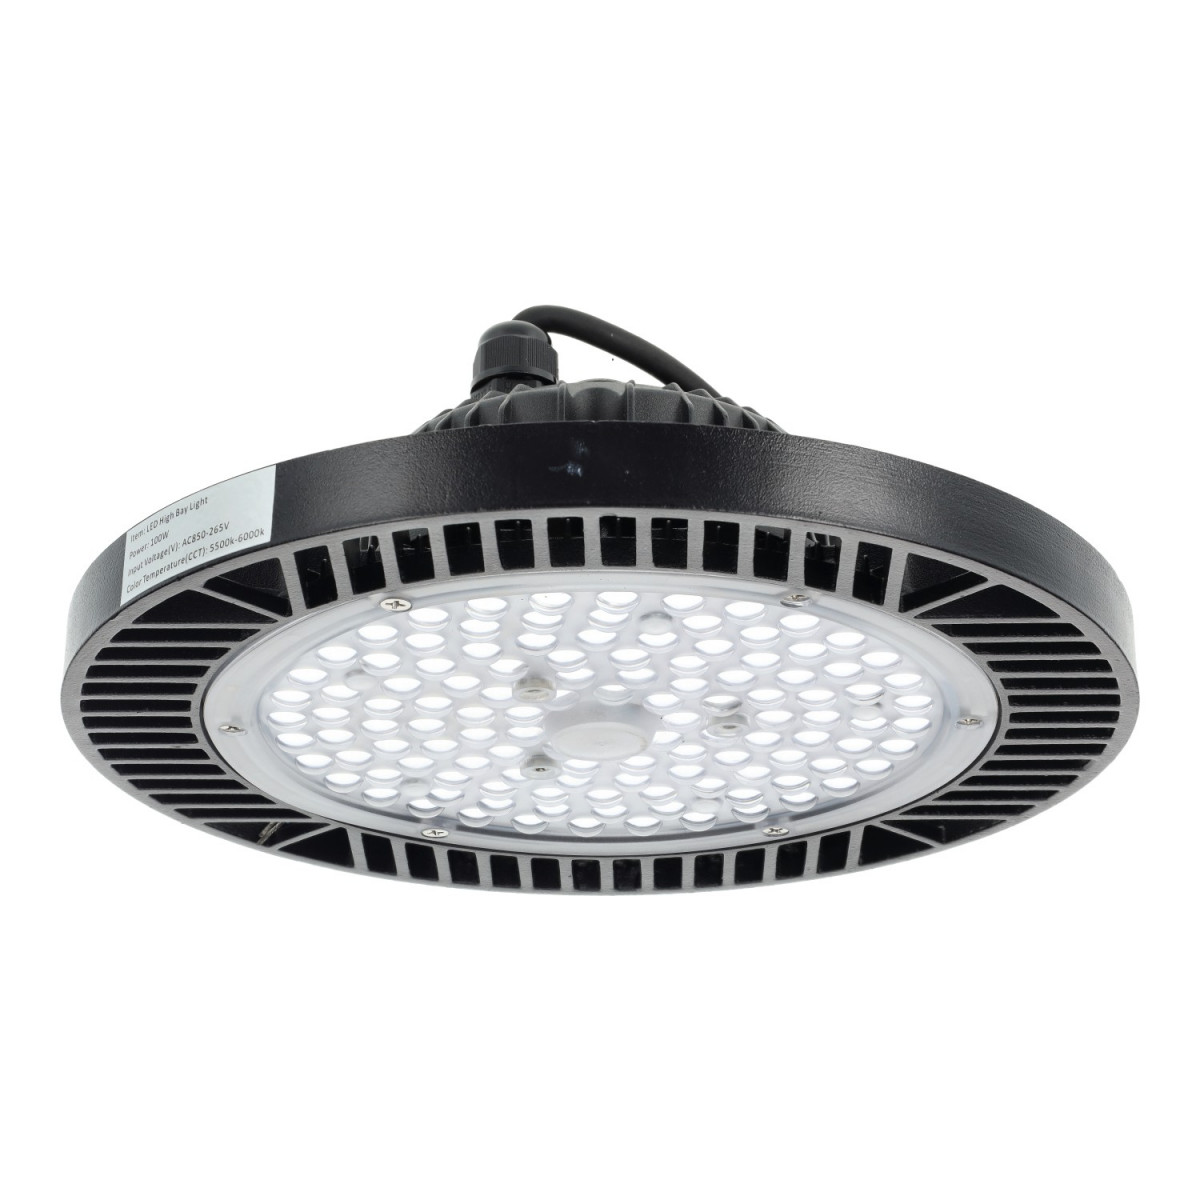 microwave Onlooker Miscellaneous goods UFO High Bay LED Light - 200W, Industrial